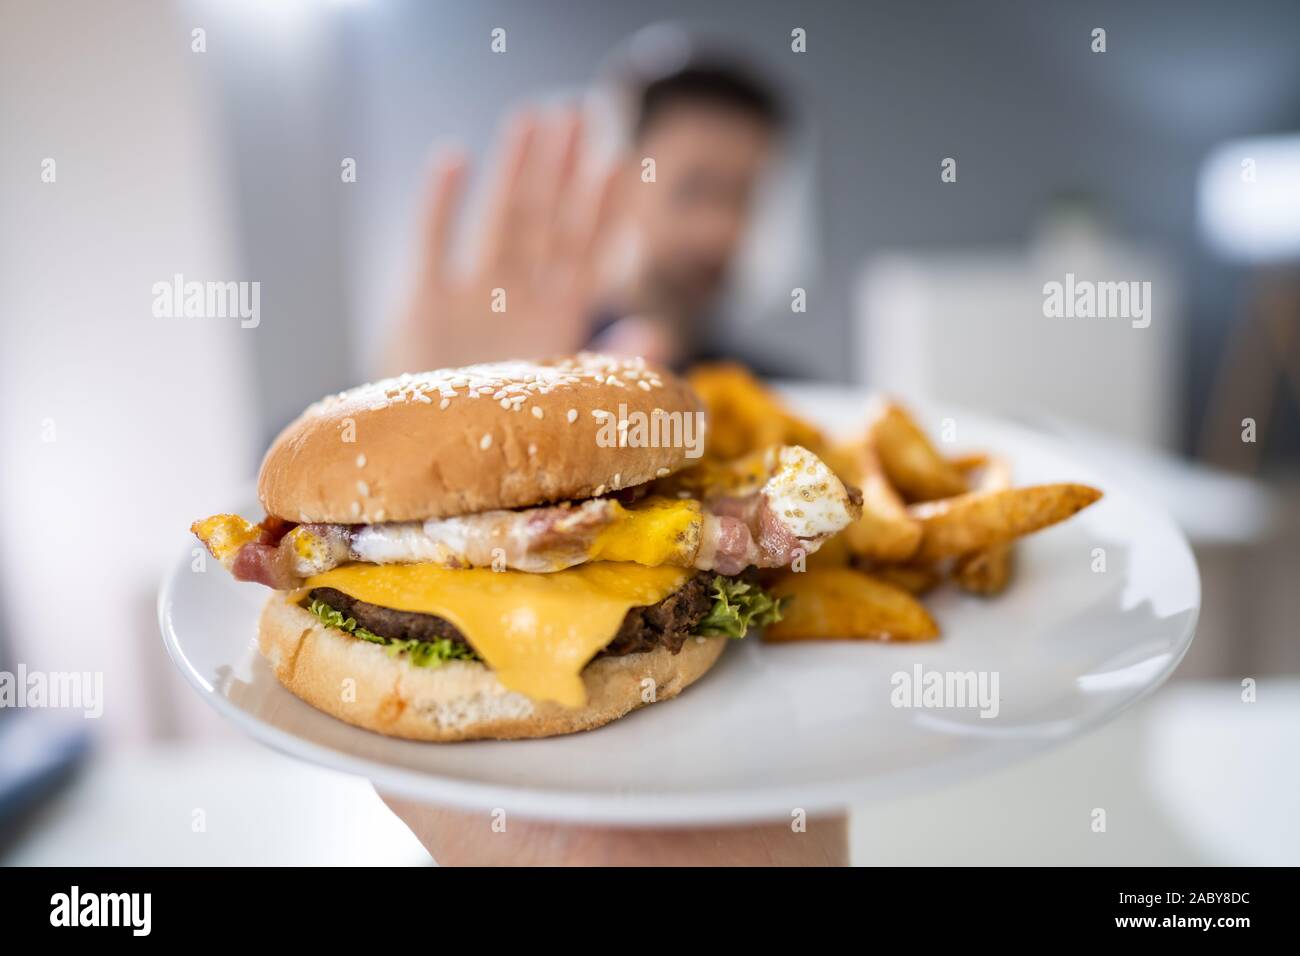 Close-up Of A Man's Hand Refusing Burger Offered By Person Stock Photo